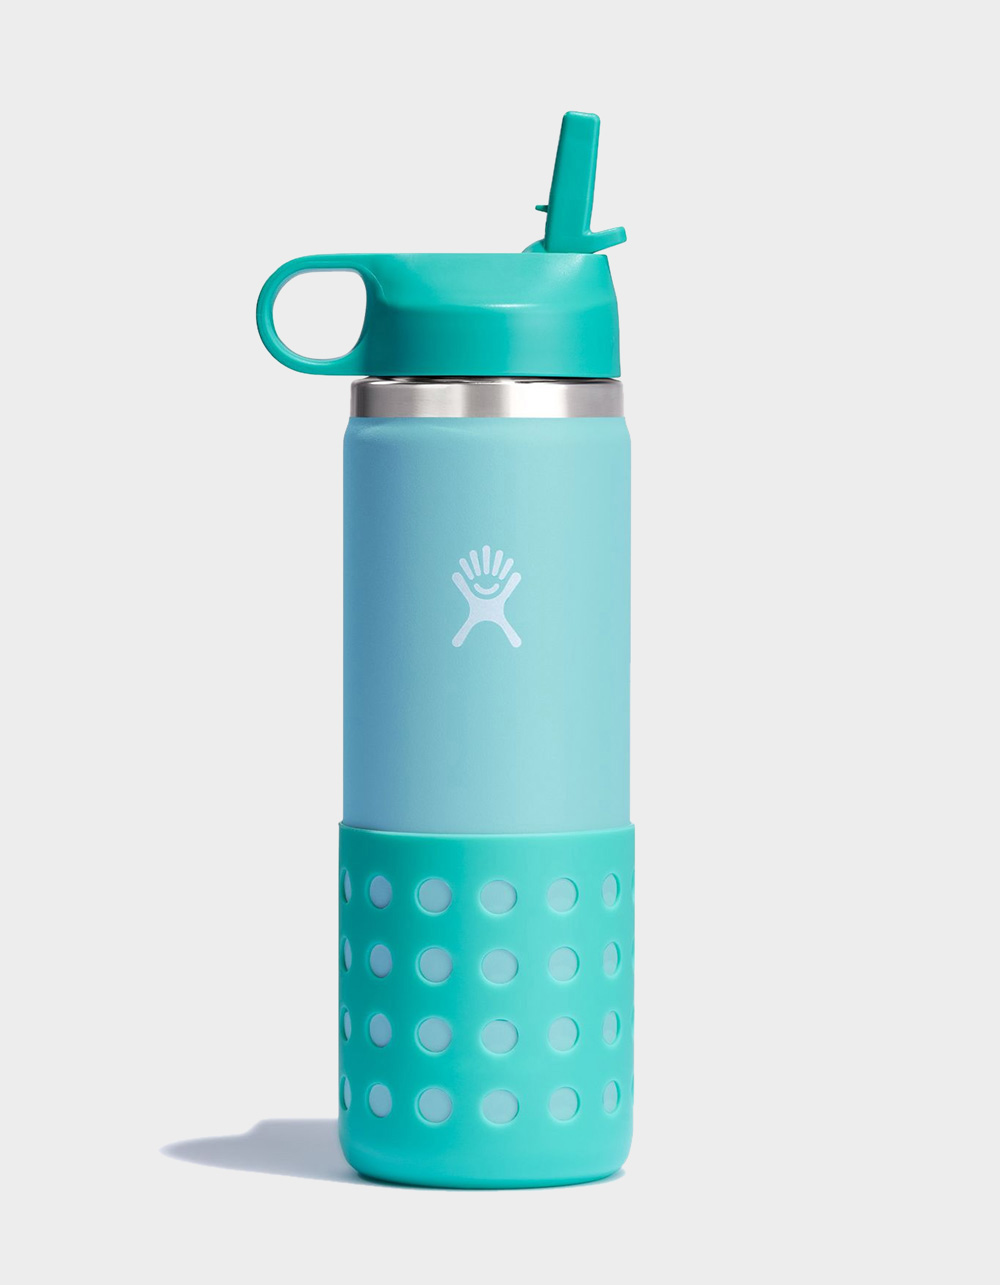 The Hydro Flask Straw Cup shoppers call 'better than Stanley' is currently  25% off and it's selling fast, The Daily Courier